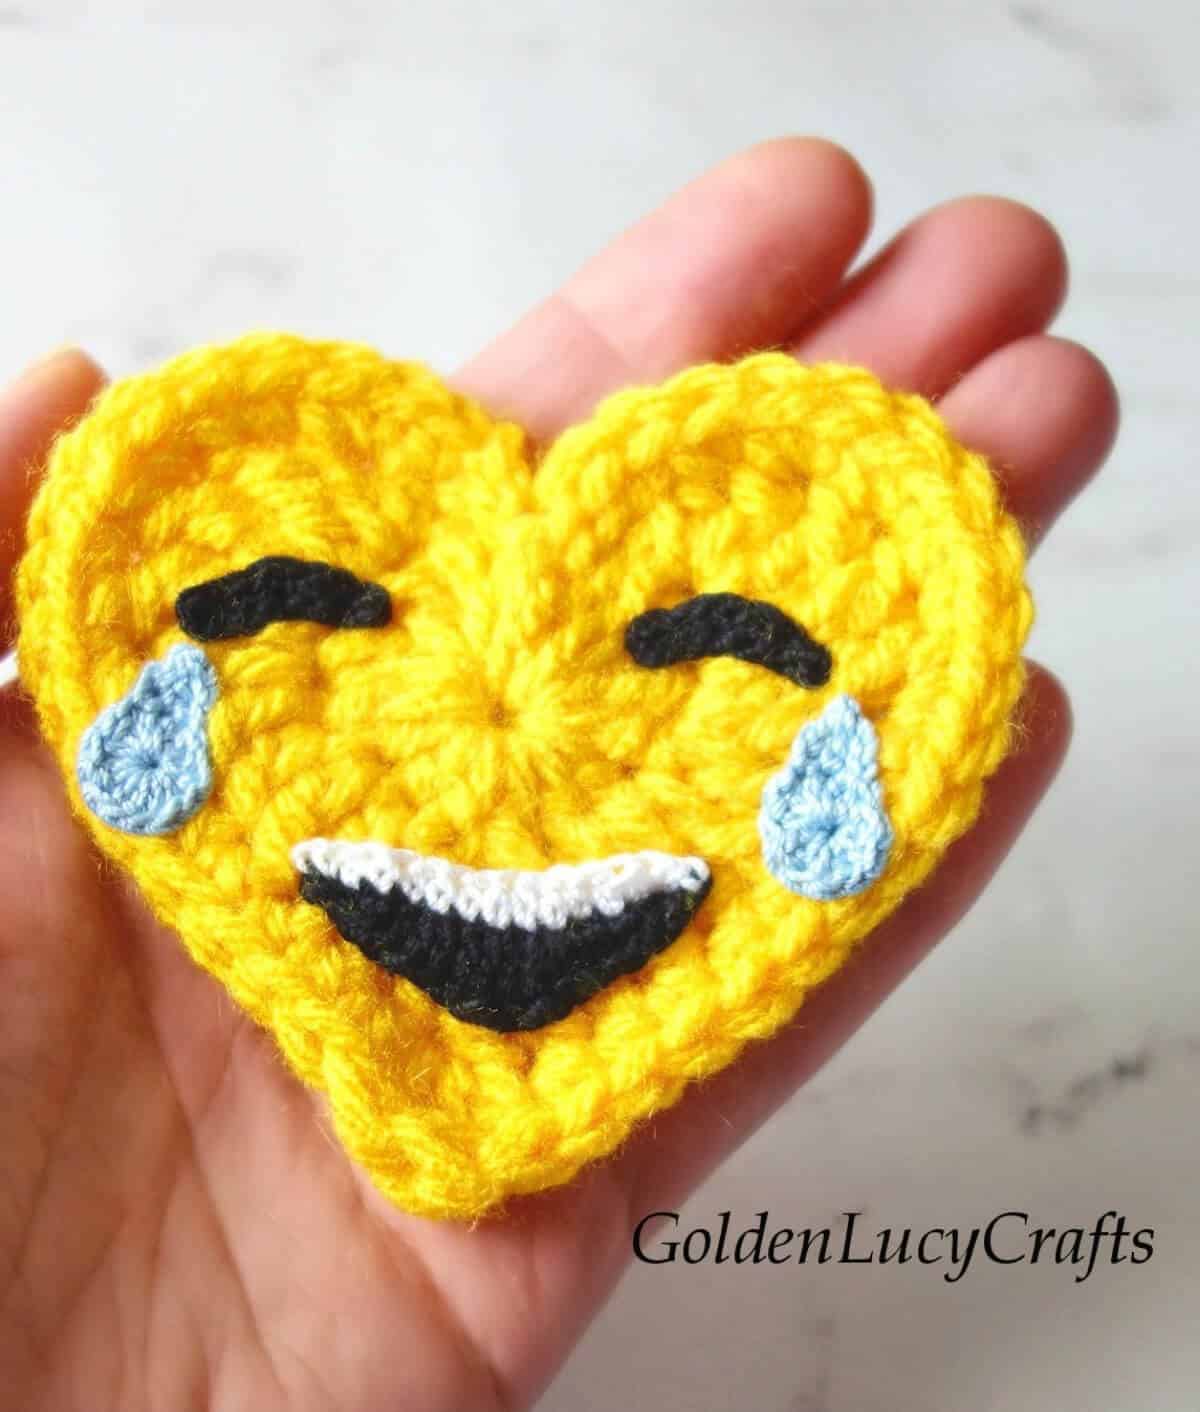 Crochet heart-shaped emoji in the palm of a hand.